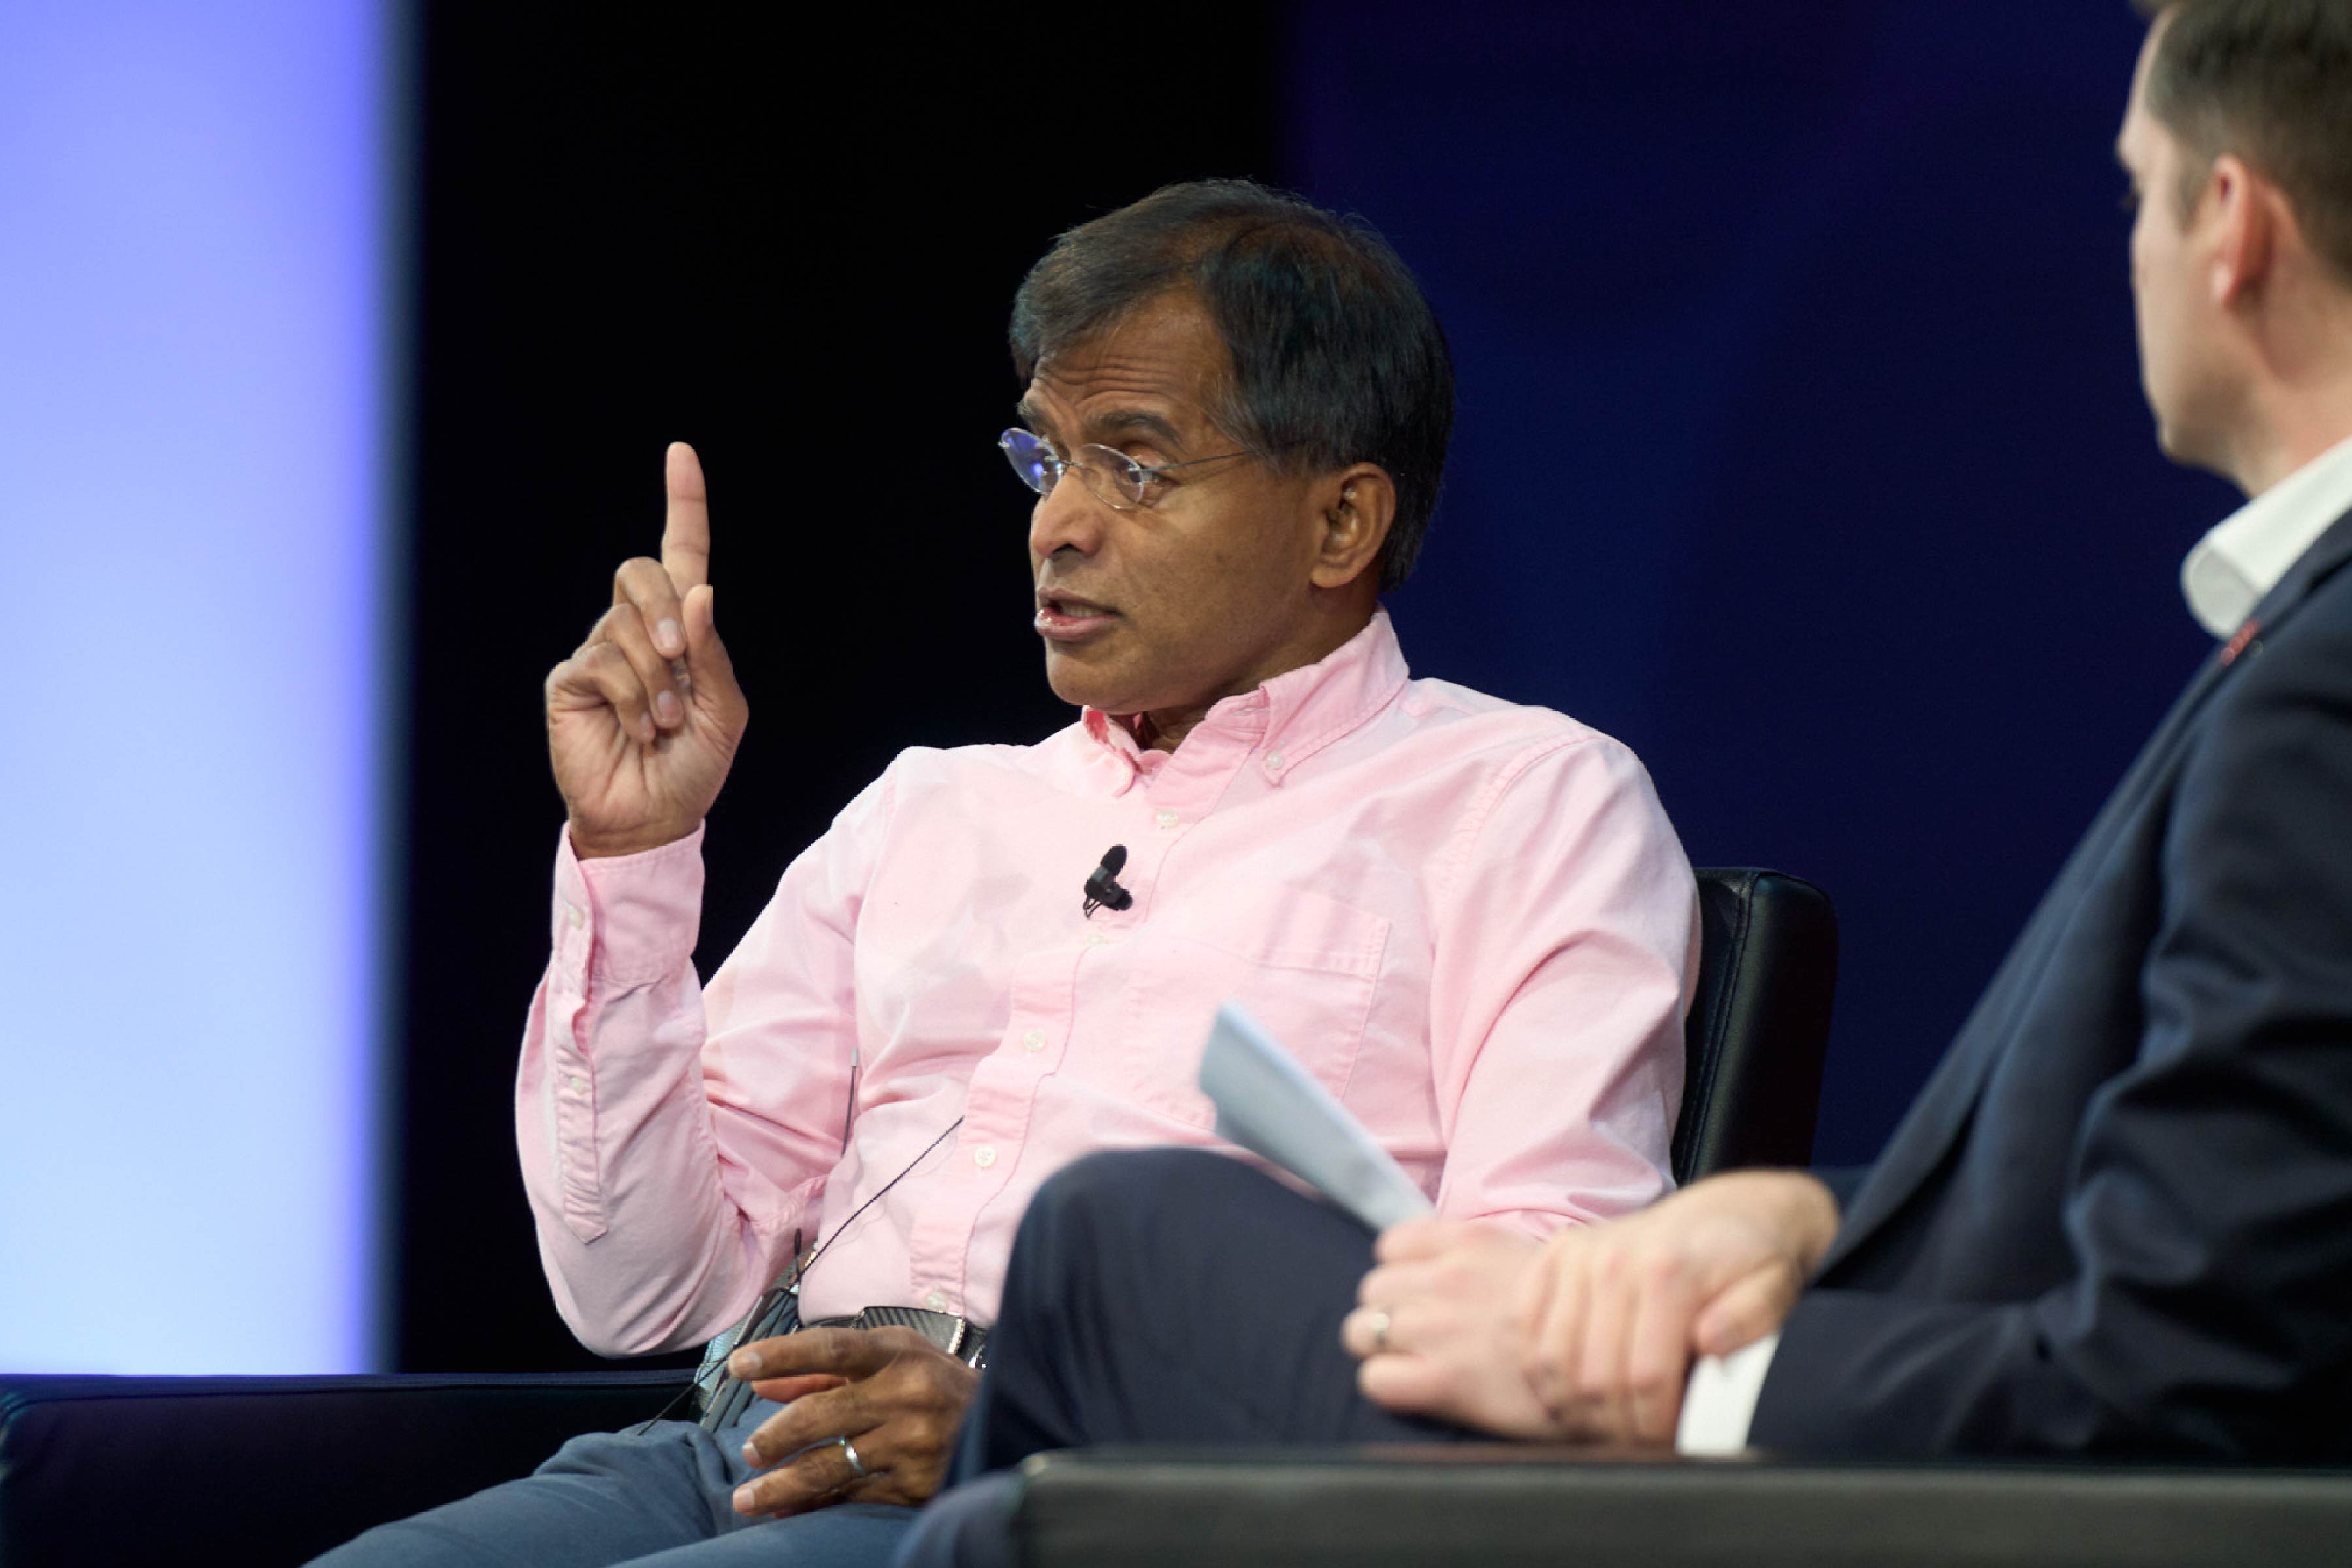 Aswath Damodaran and Adam Fleck on stage at the 2023 Morningstar Investment Conference.